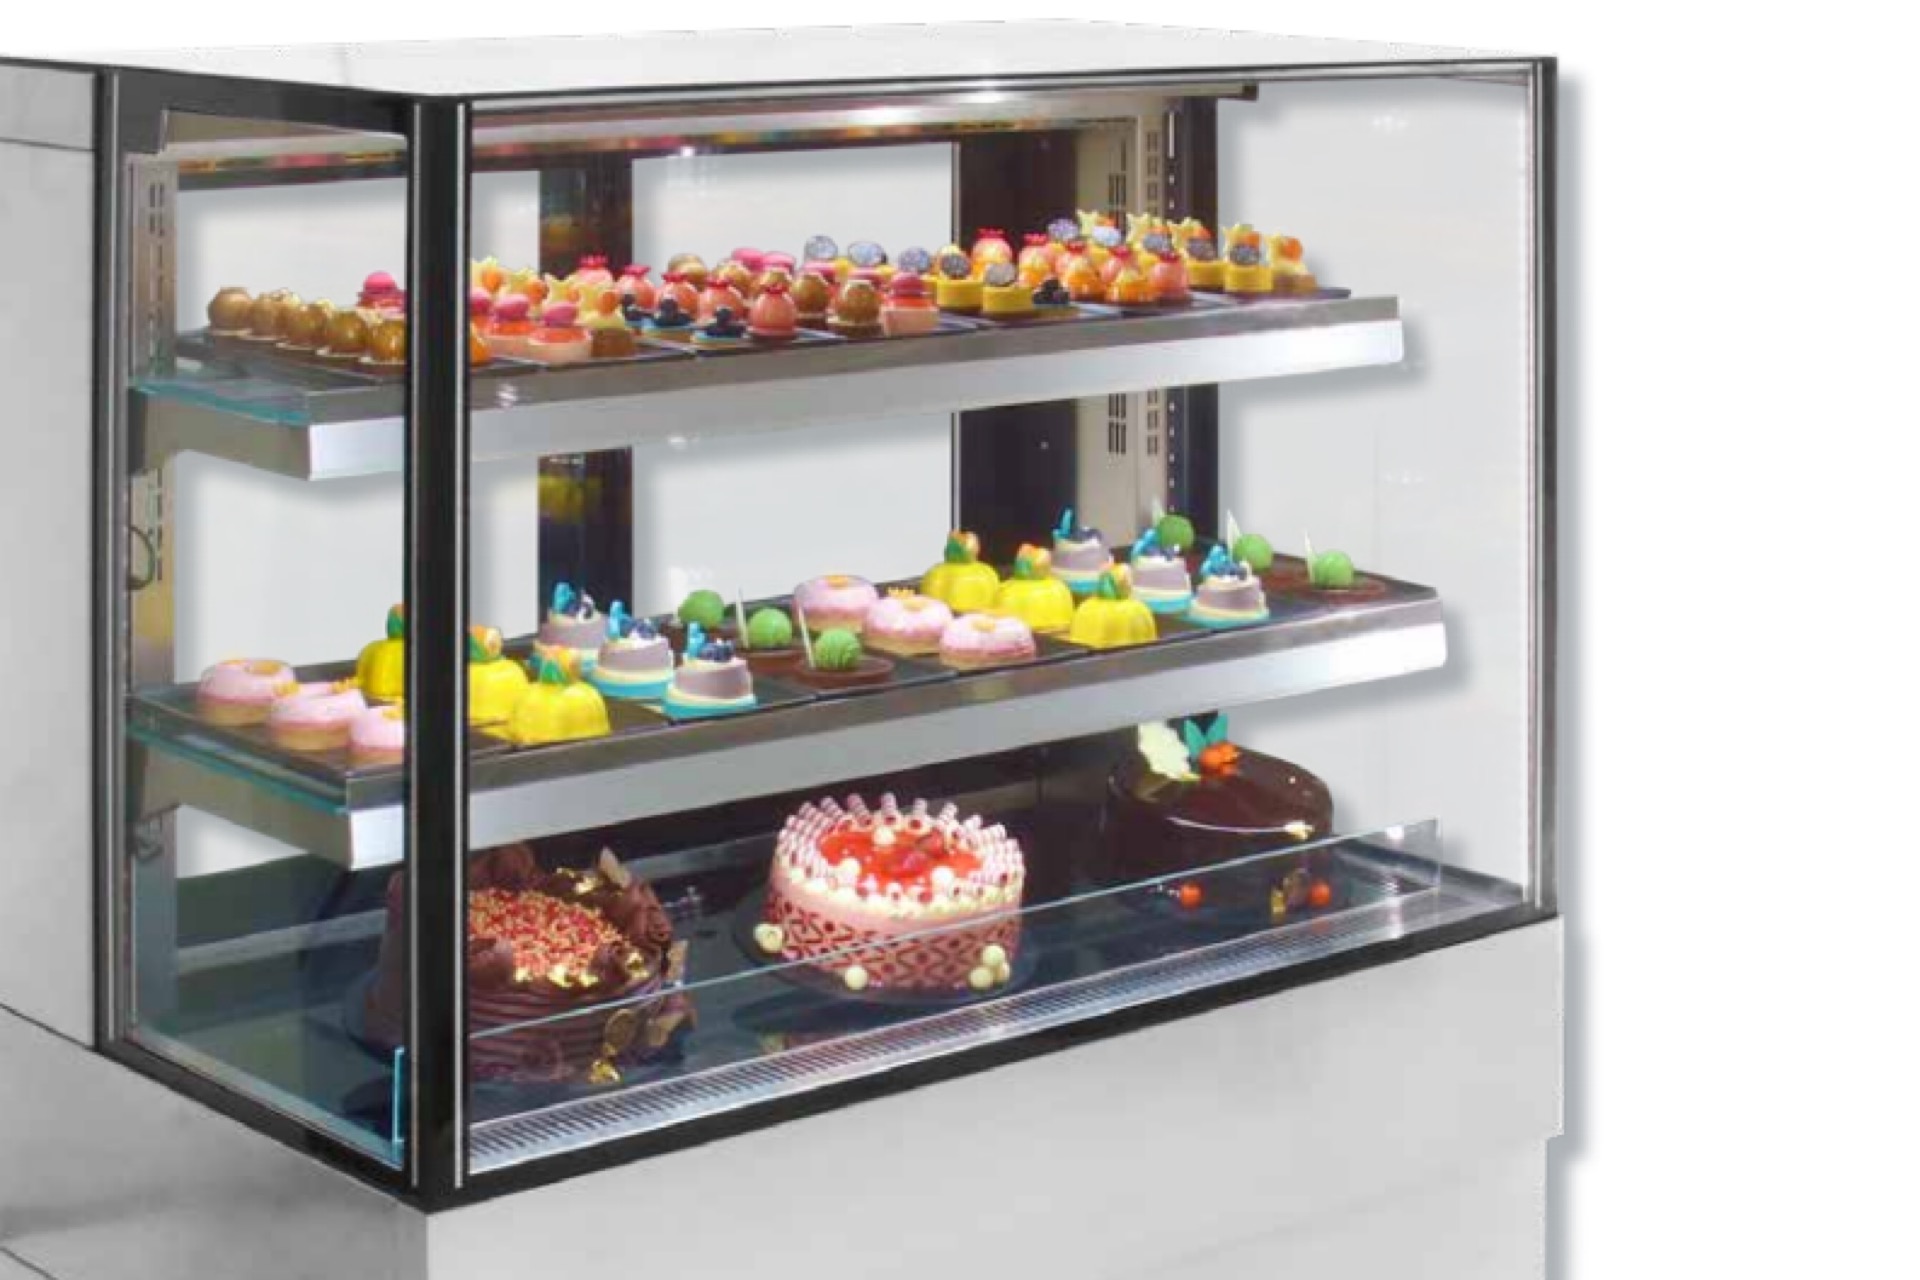 Your pastries deserve the best. Give them a home in Airex Freestanding Refrigerated Displays